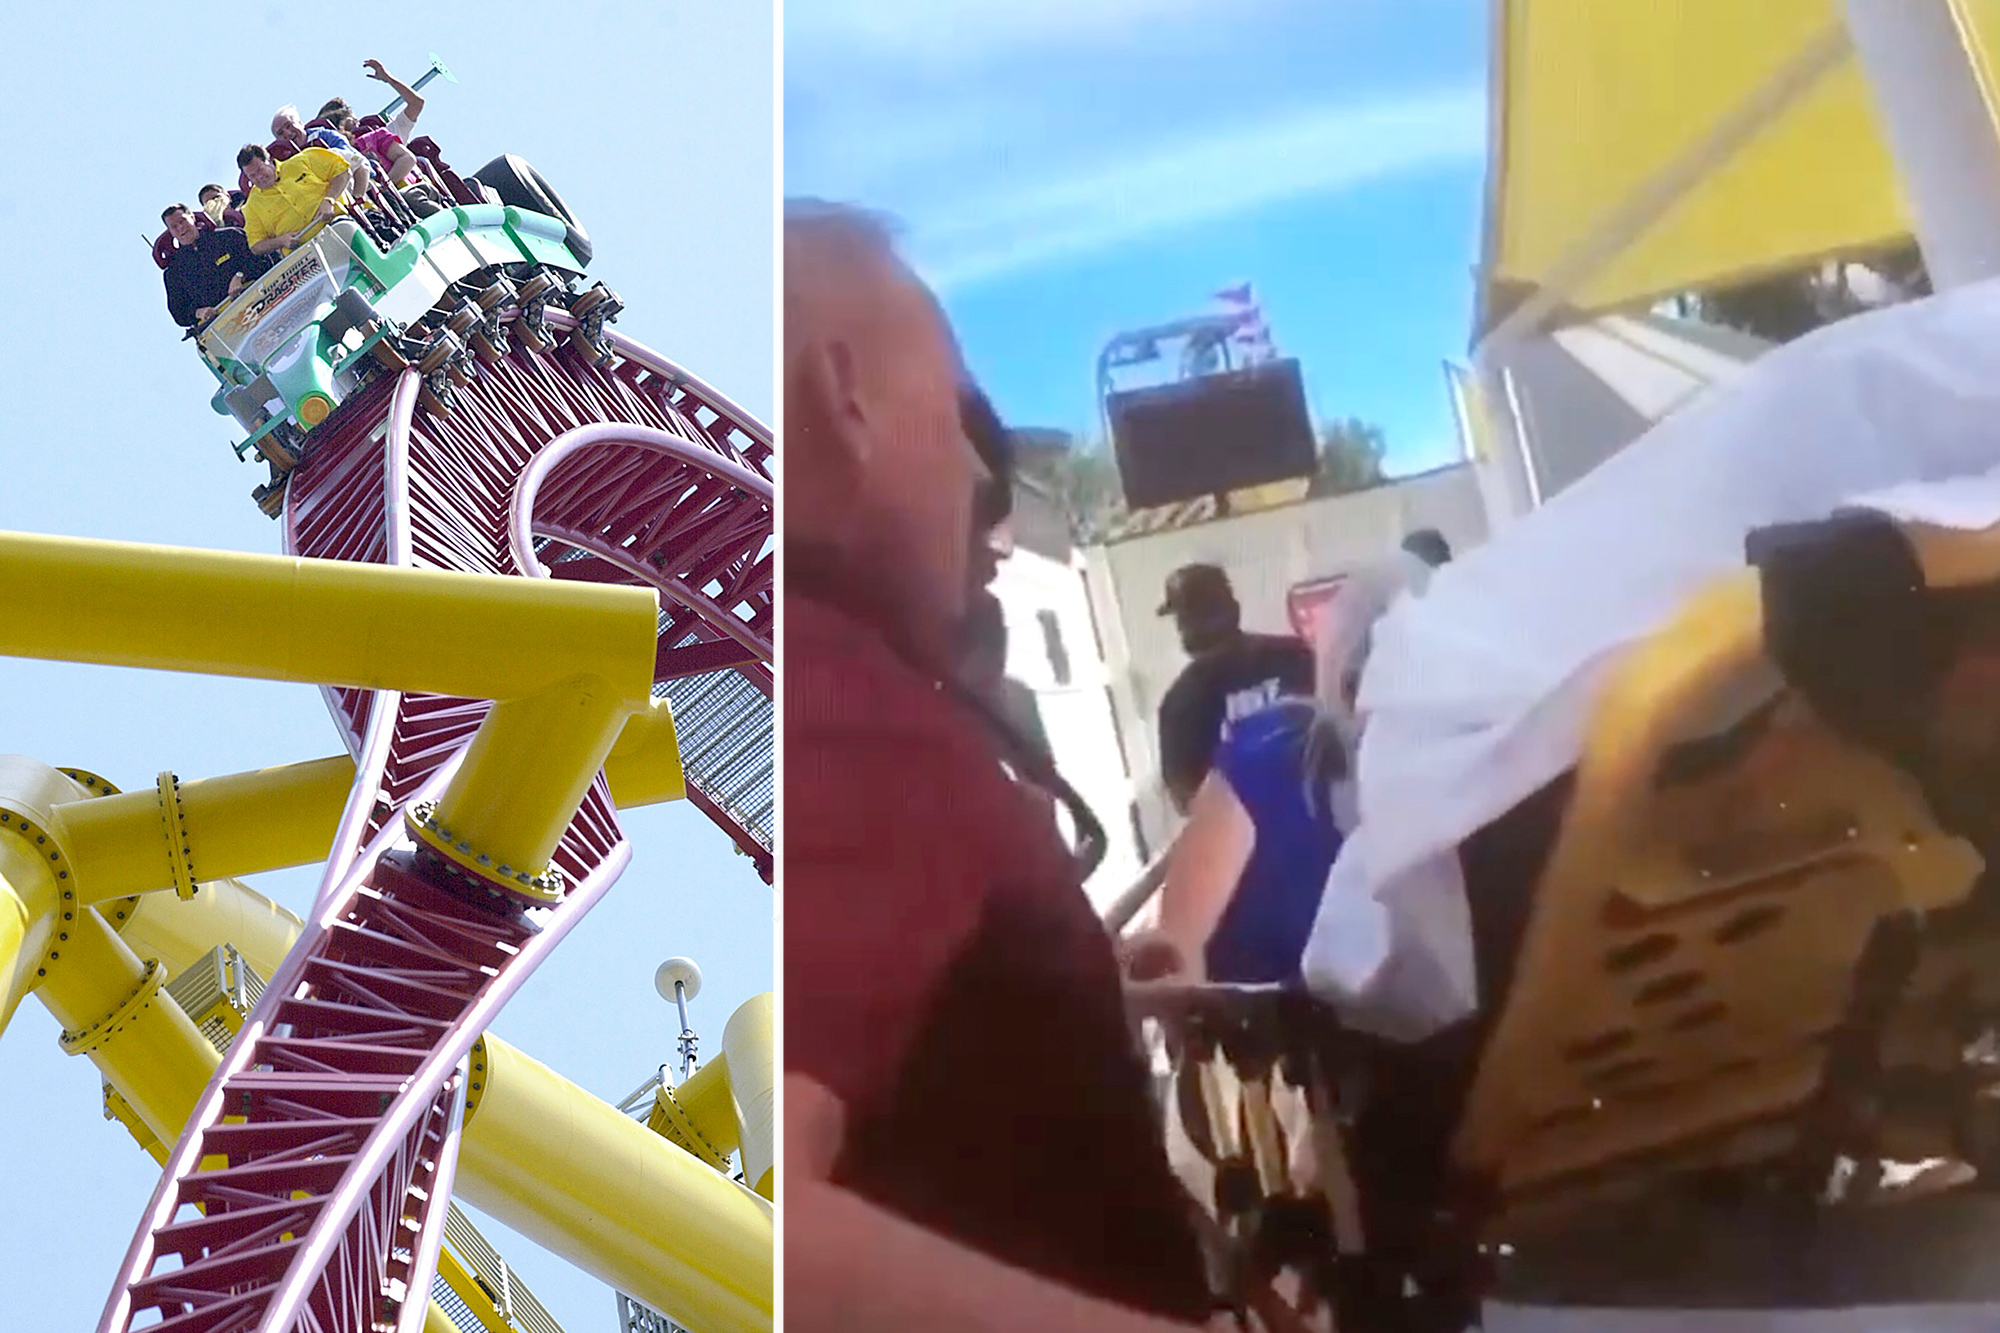 dawn pearce add girl on roller coaster loses shirt photo